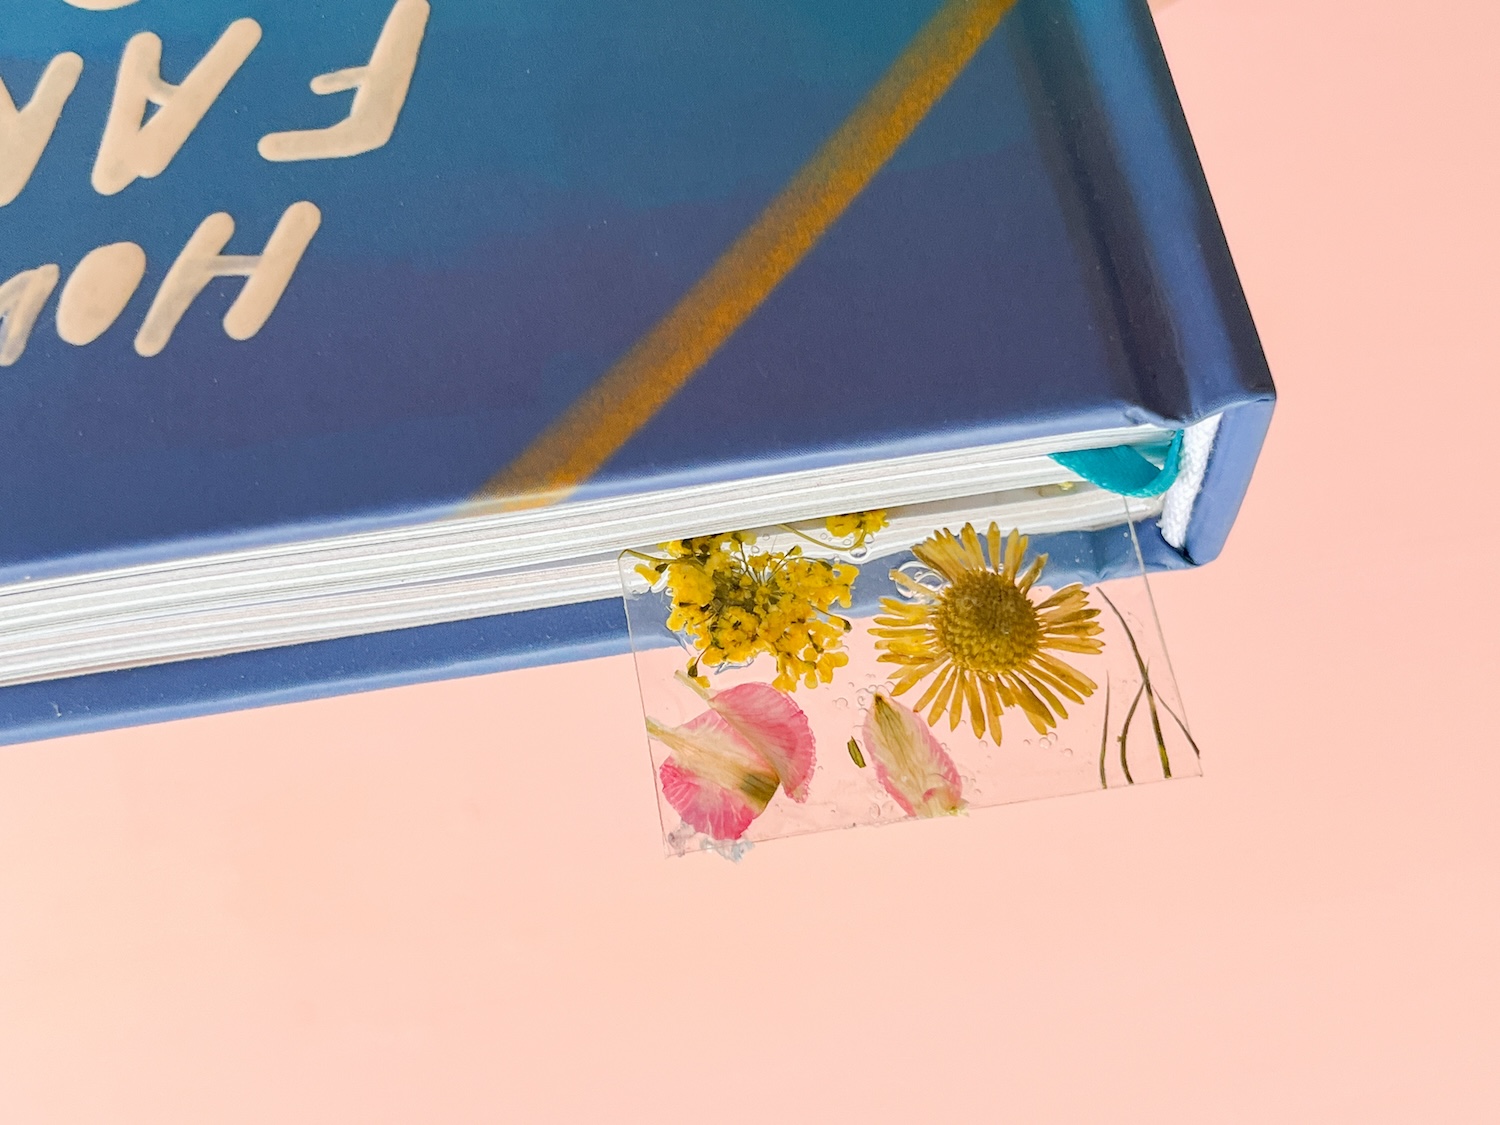 Dried Flower Bookmark peeking out of a book